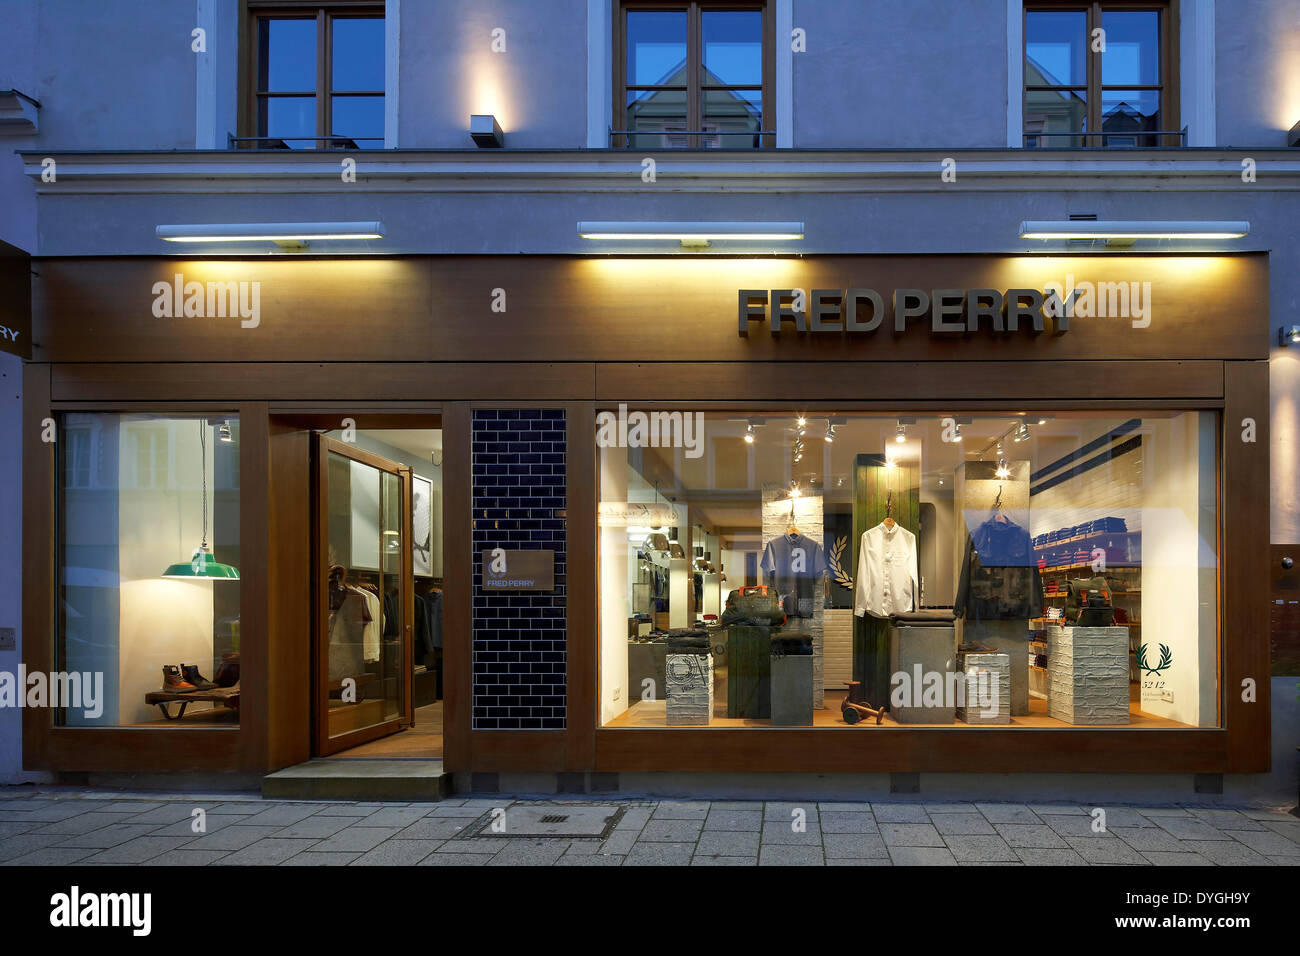 Fred Perry, München, Munich, Germany. Architect: BuckleyGrayYeoman, 2012. Exterior front elevation at dusk. Stock Photo